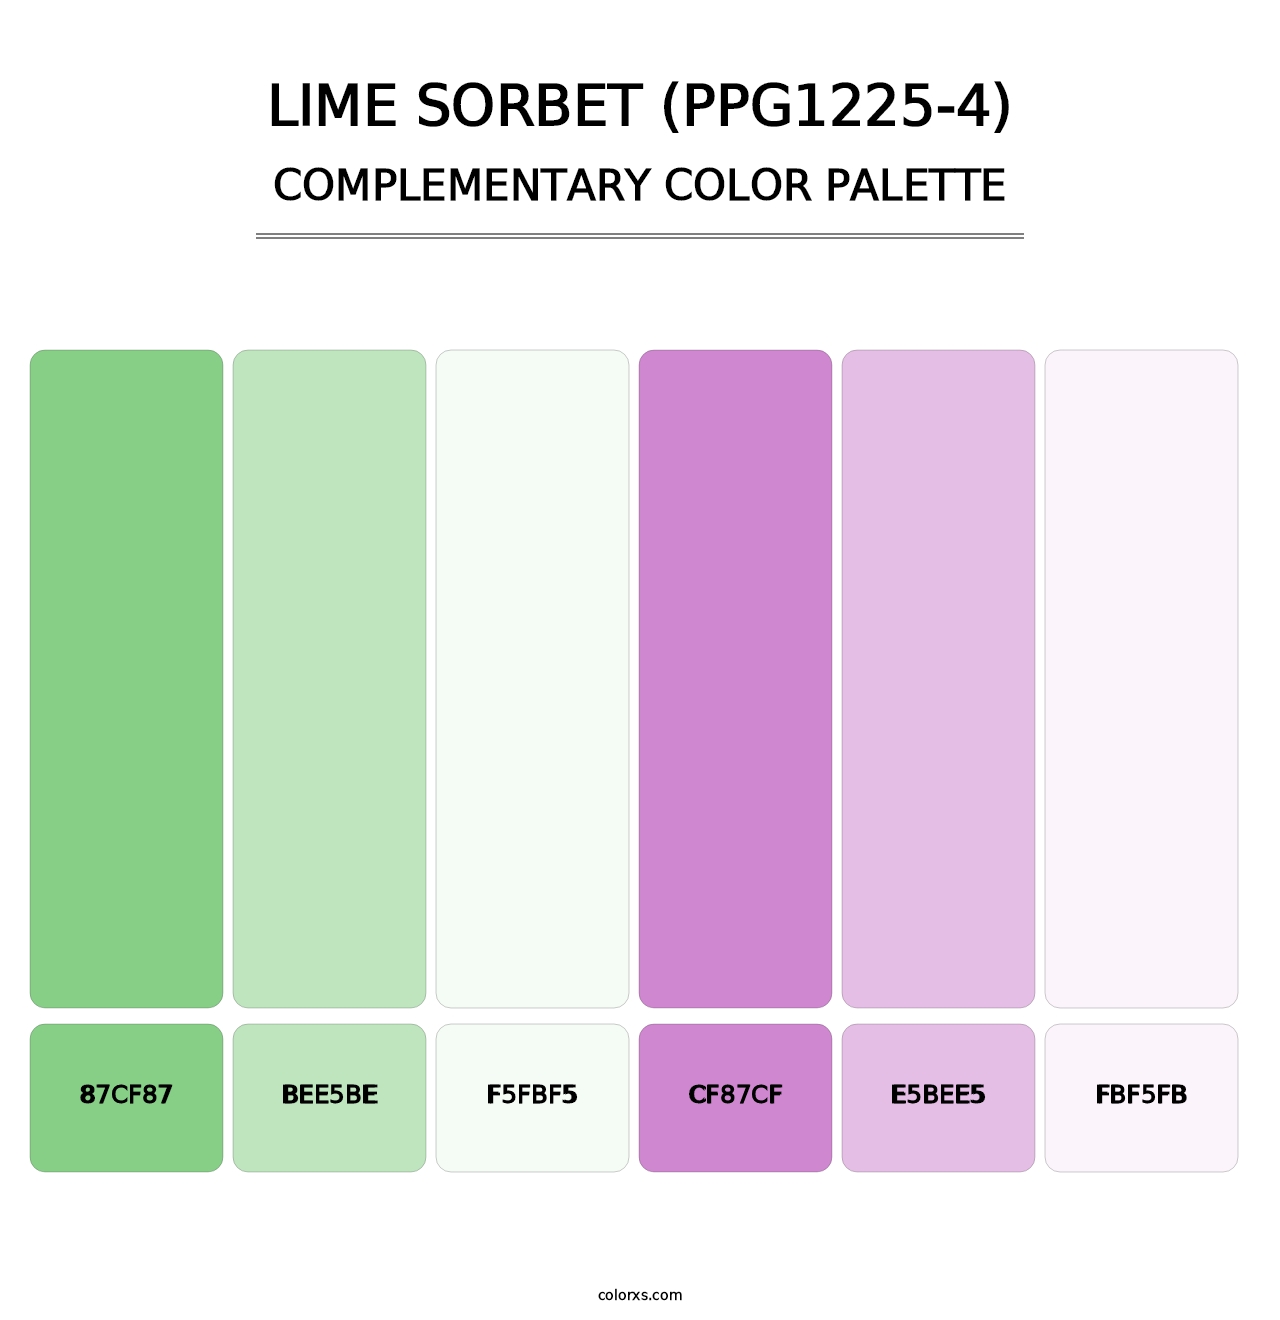 Lime Sorbet (PPG1225-4) - Complementary Color Palette